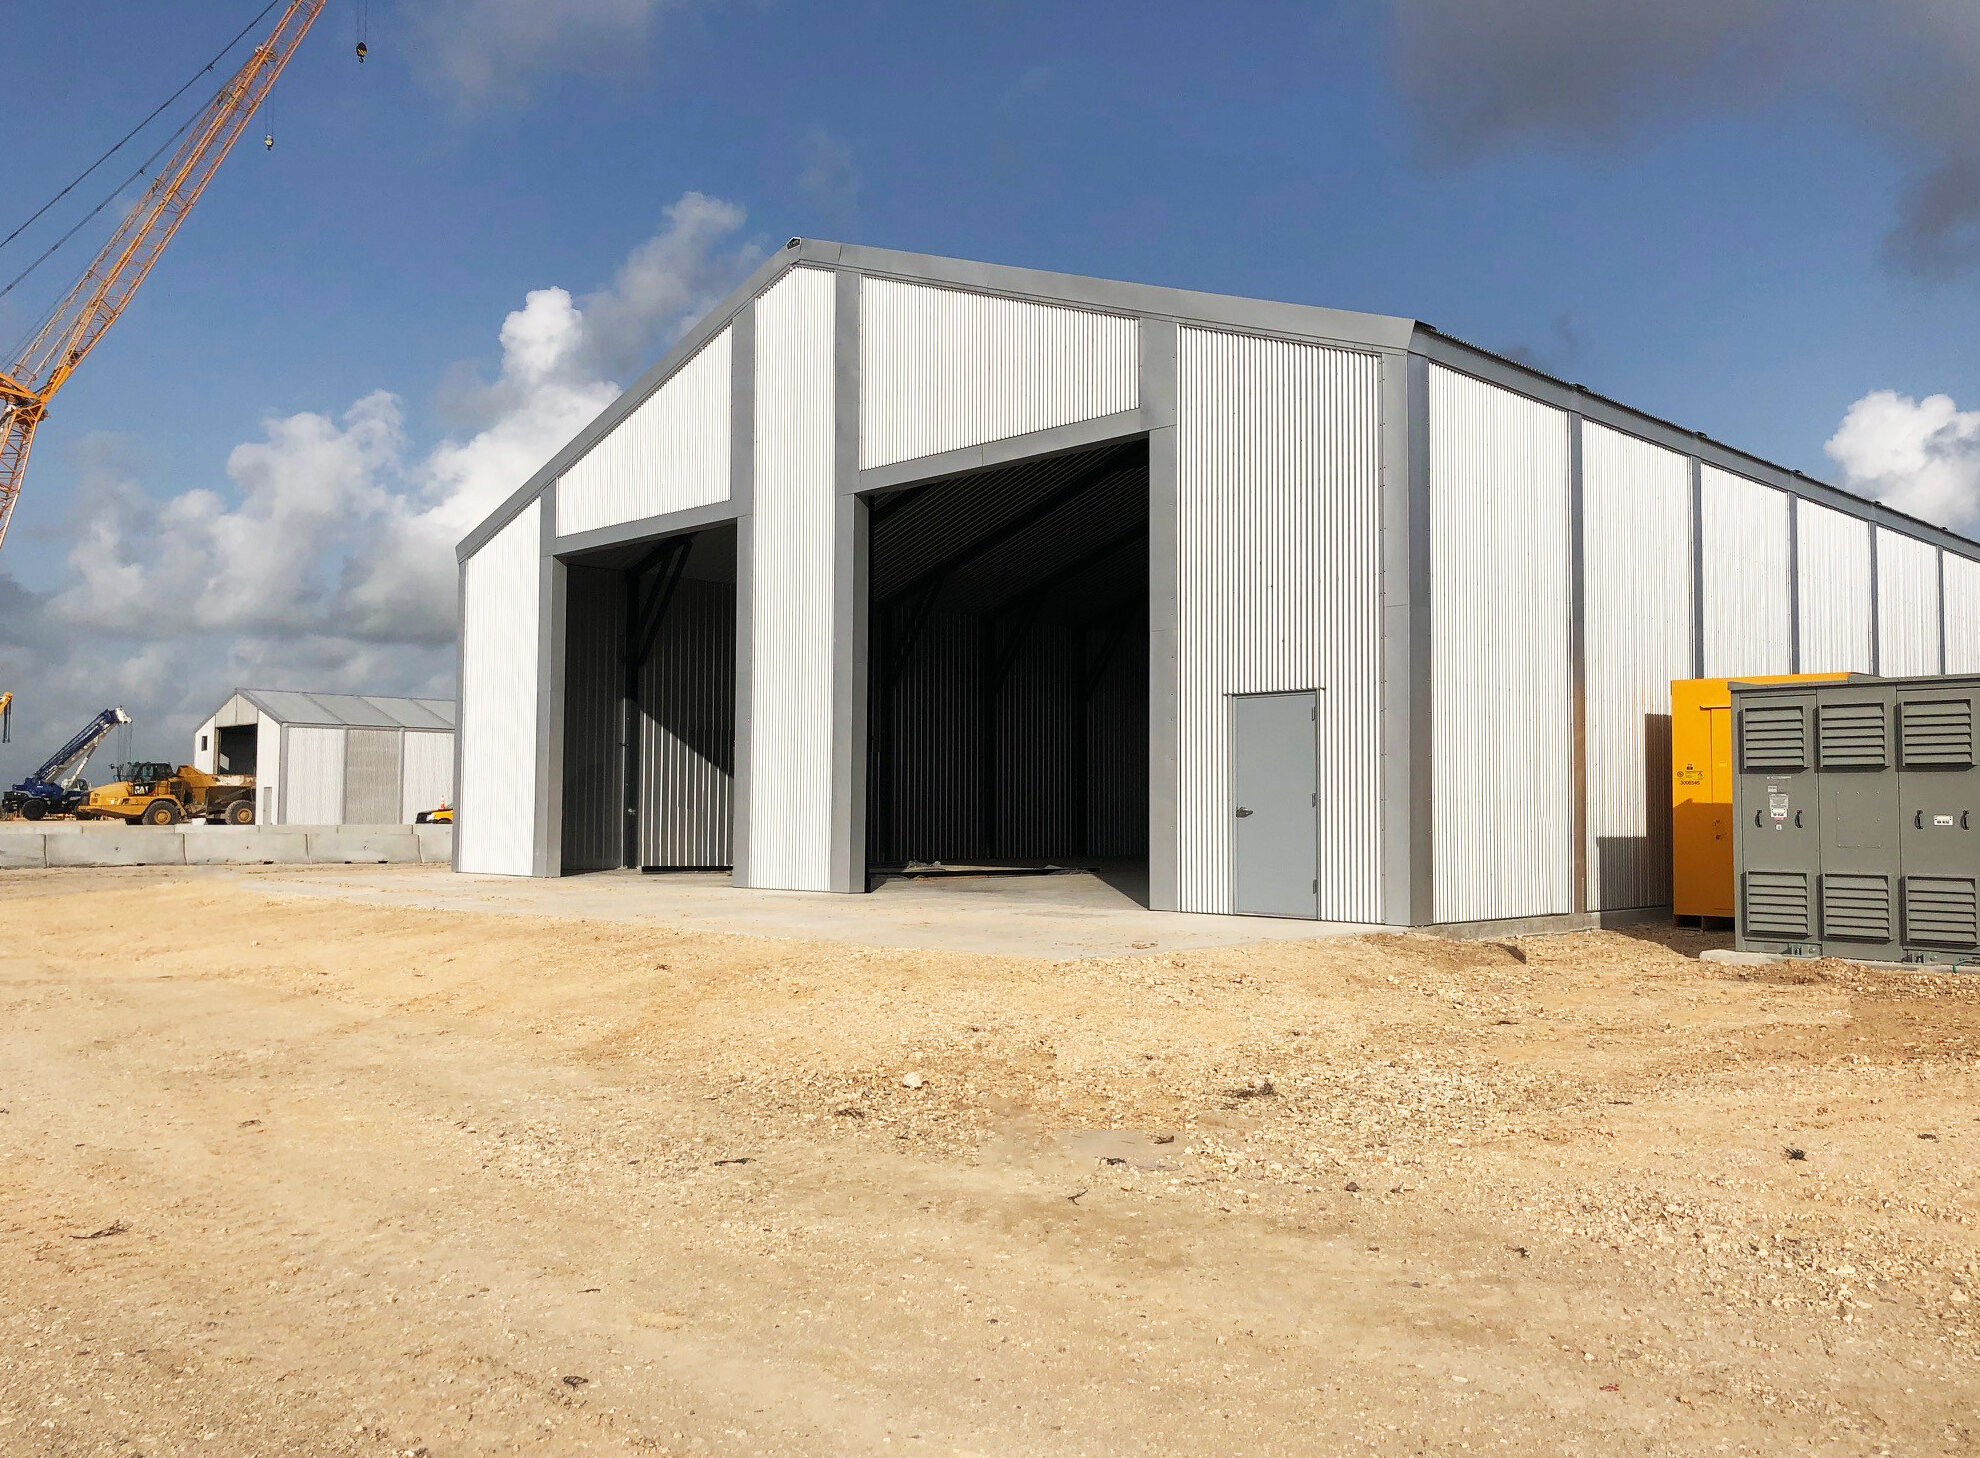  Our purpose is to provide leadership and innovation in the design, manufacturing and delivery of prefabricated products that change the way our clients work.&nbsp; 